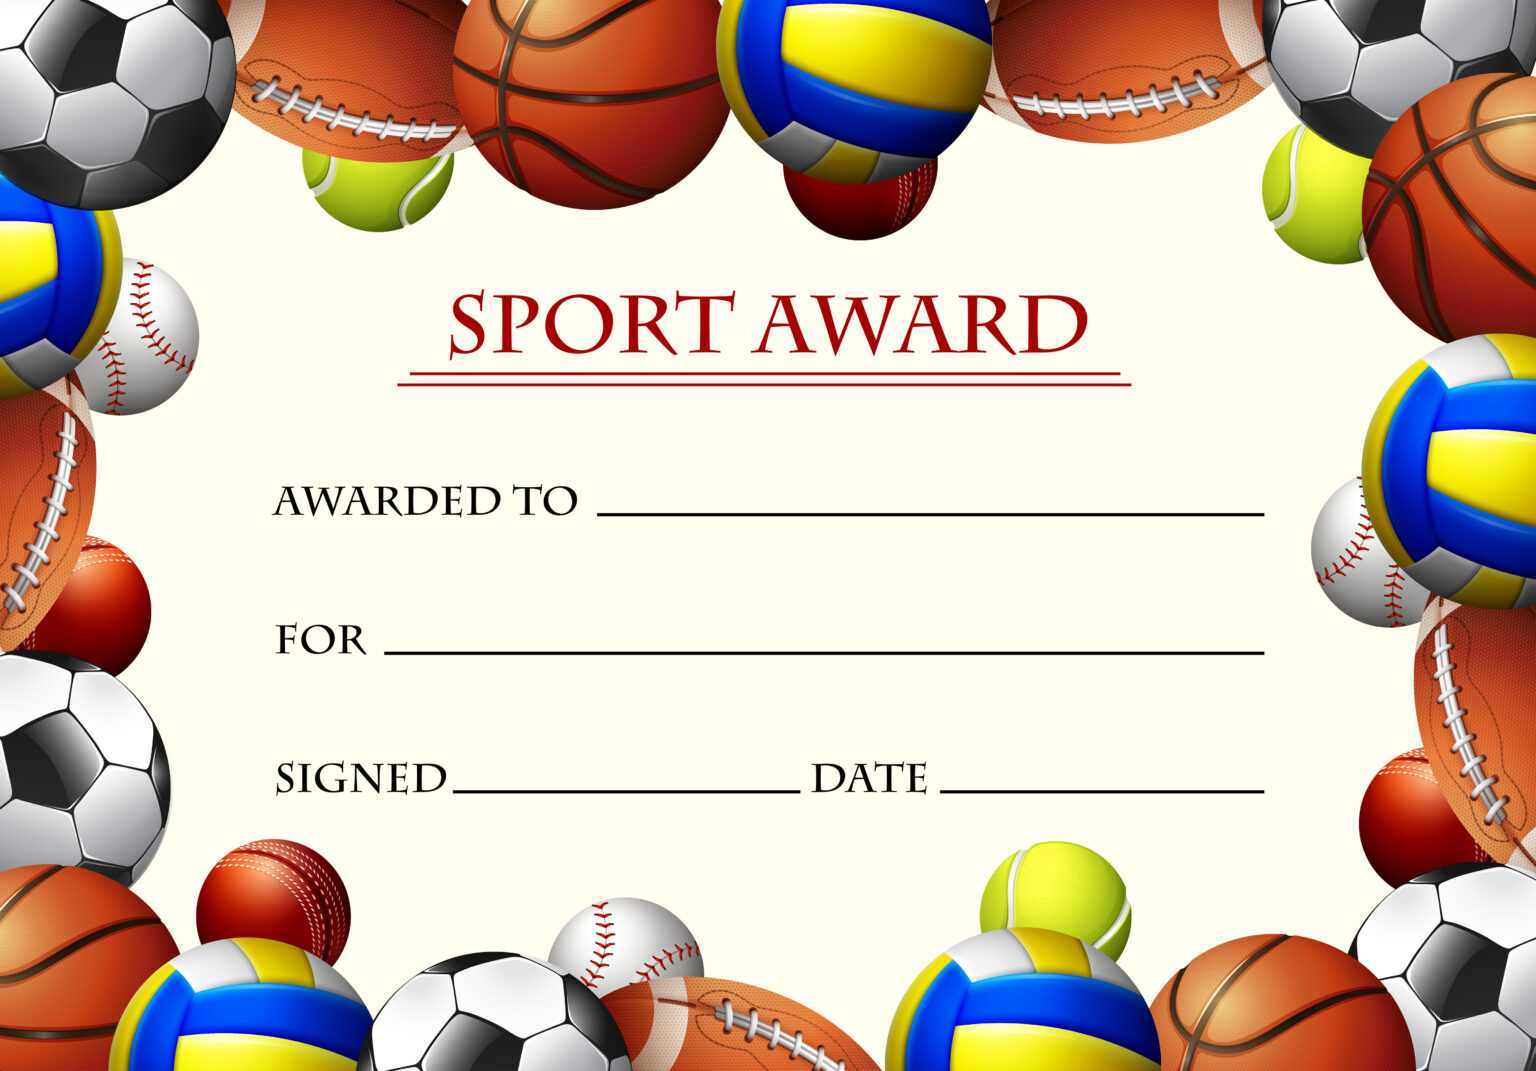 certificate-template-for-sport-award-download-free-vectors-within-basketball-camp-certificate